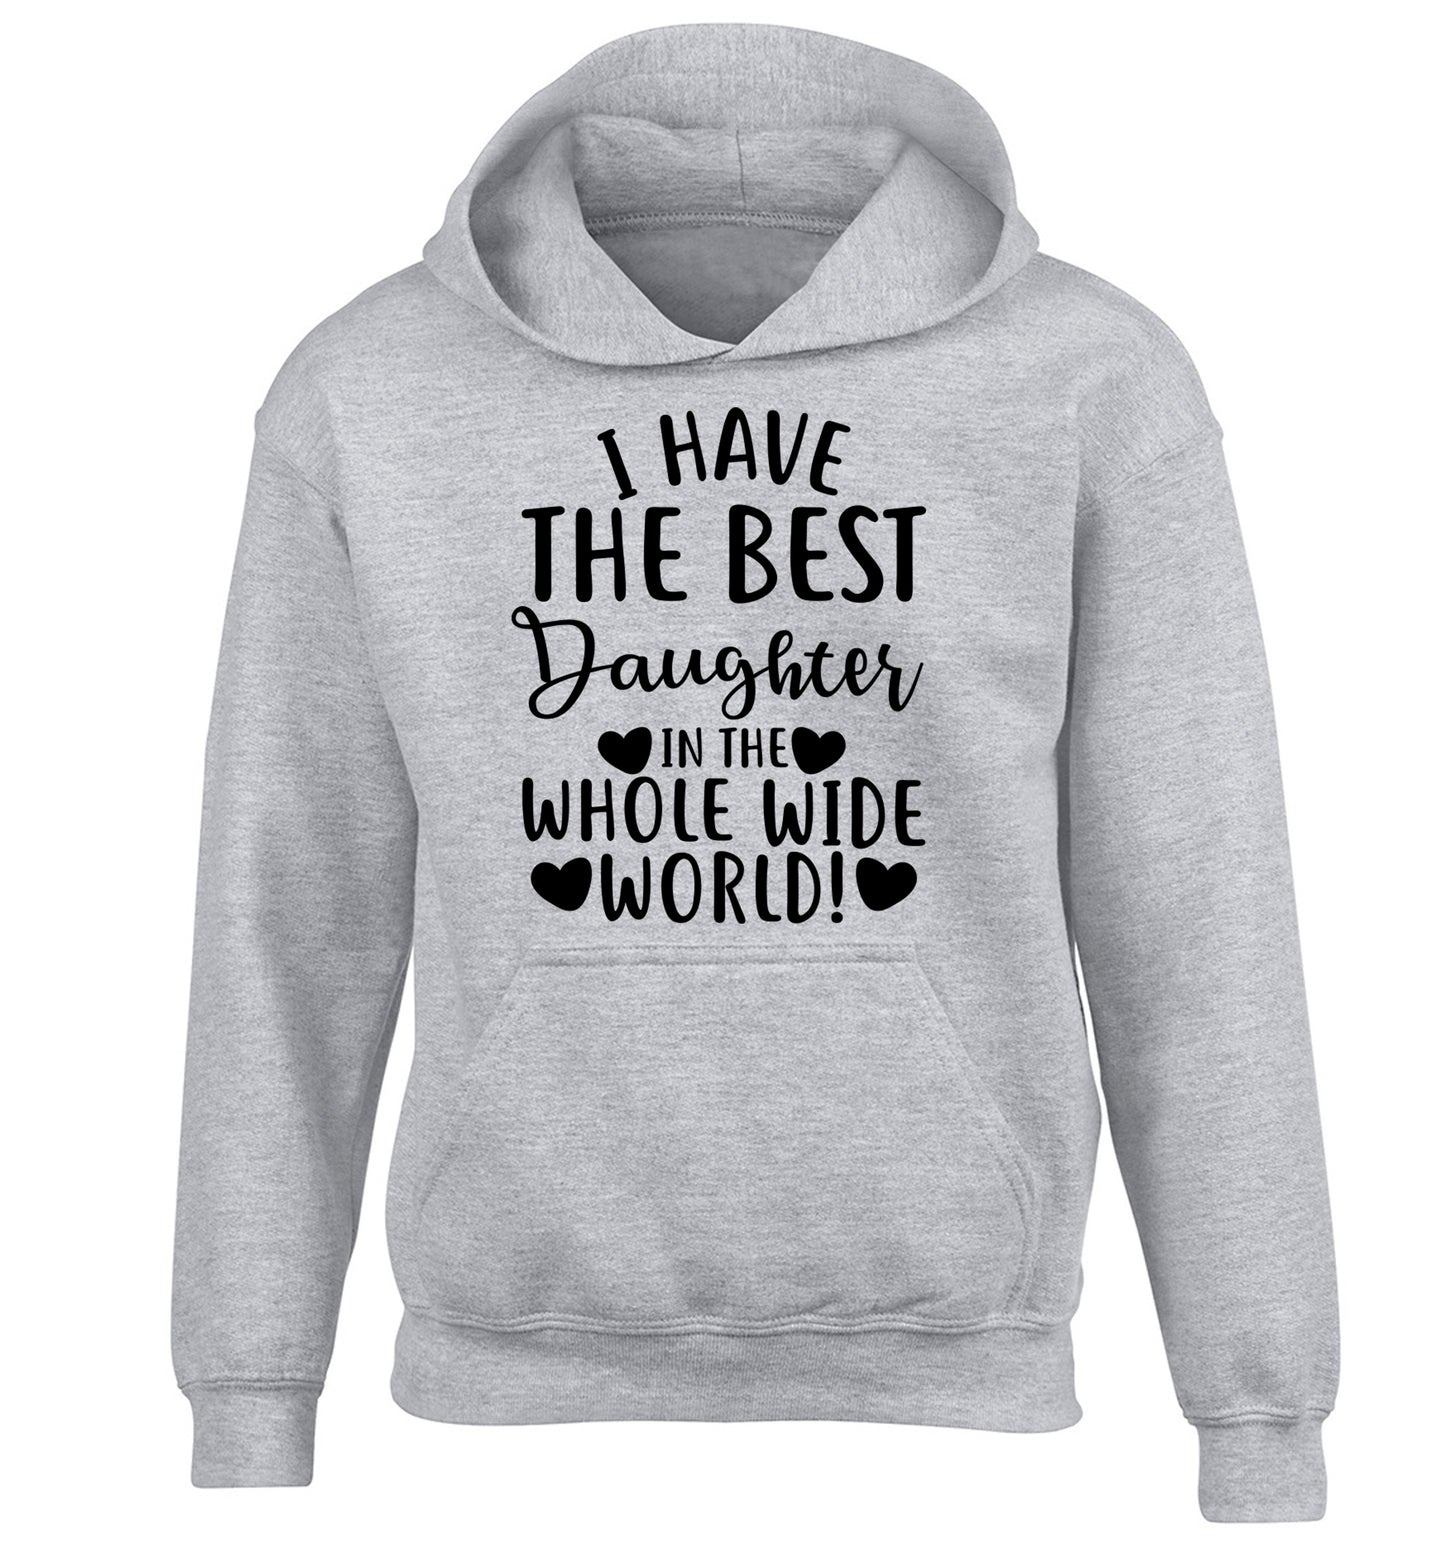 I have the best daughter in the whole wide world! children's grey hoodie 12-13 Years